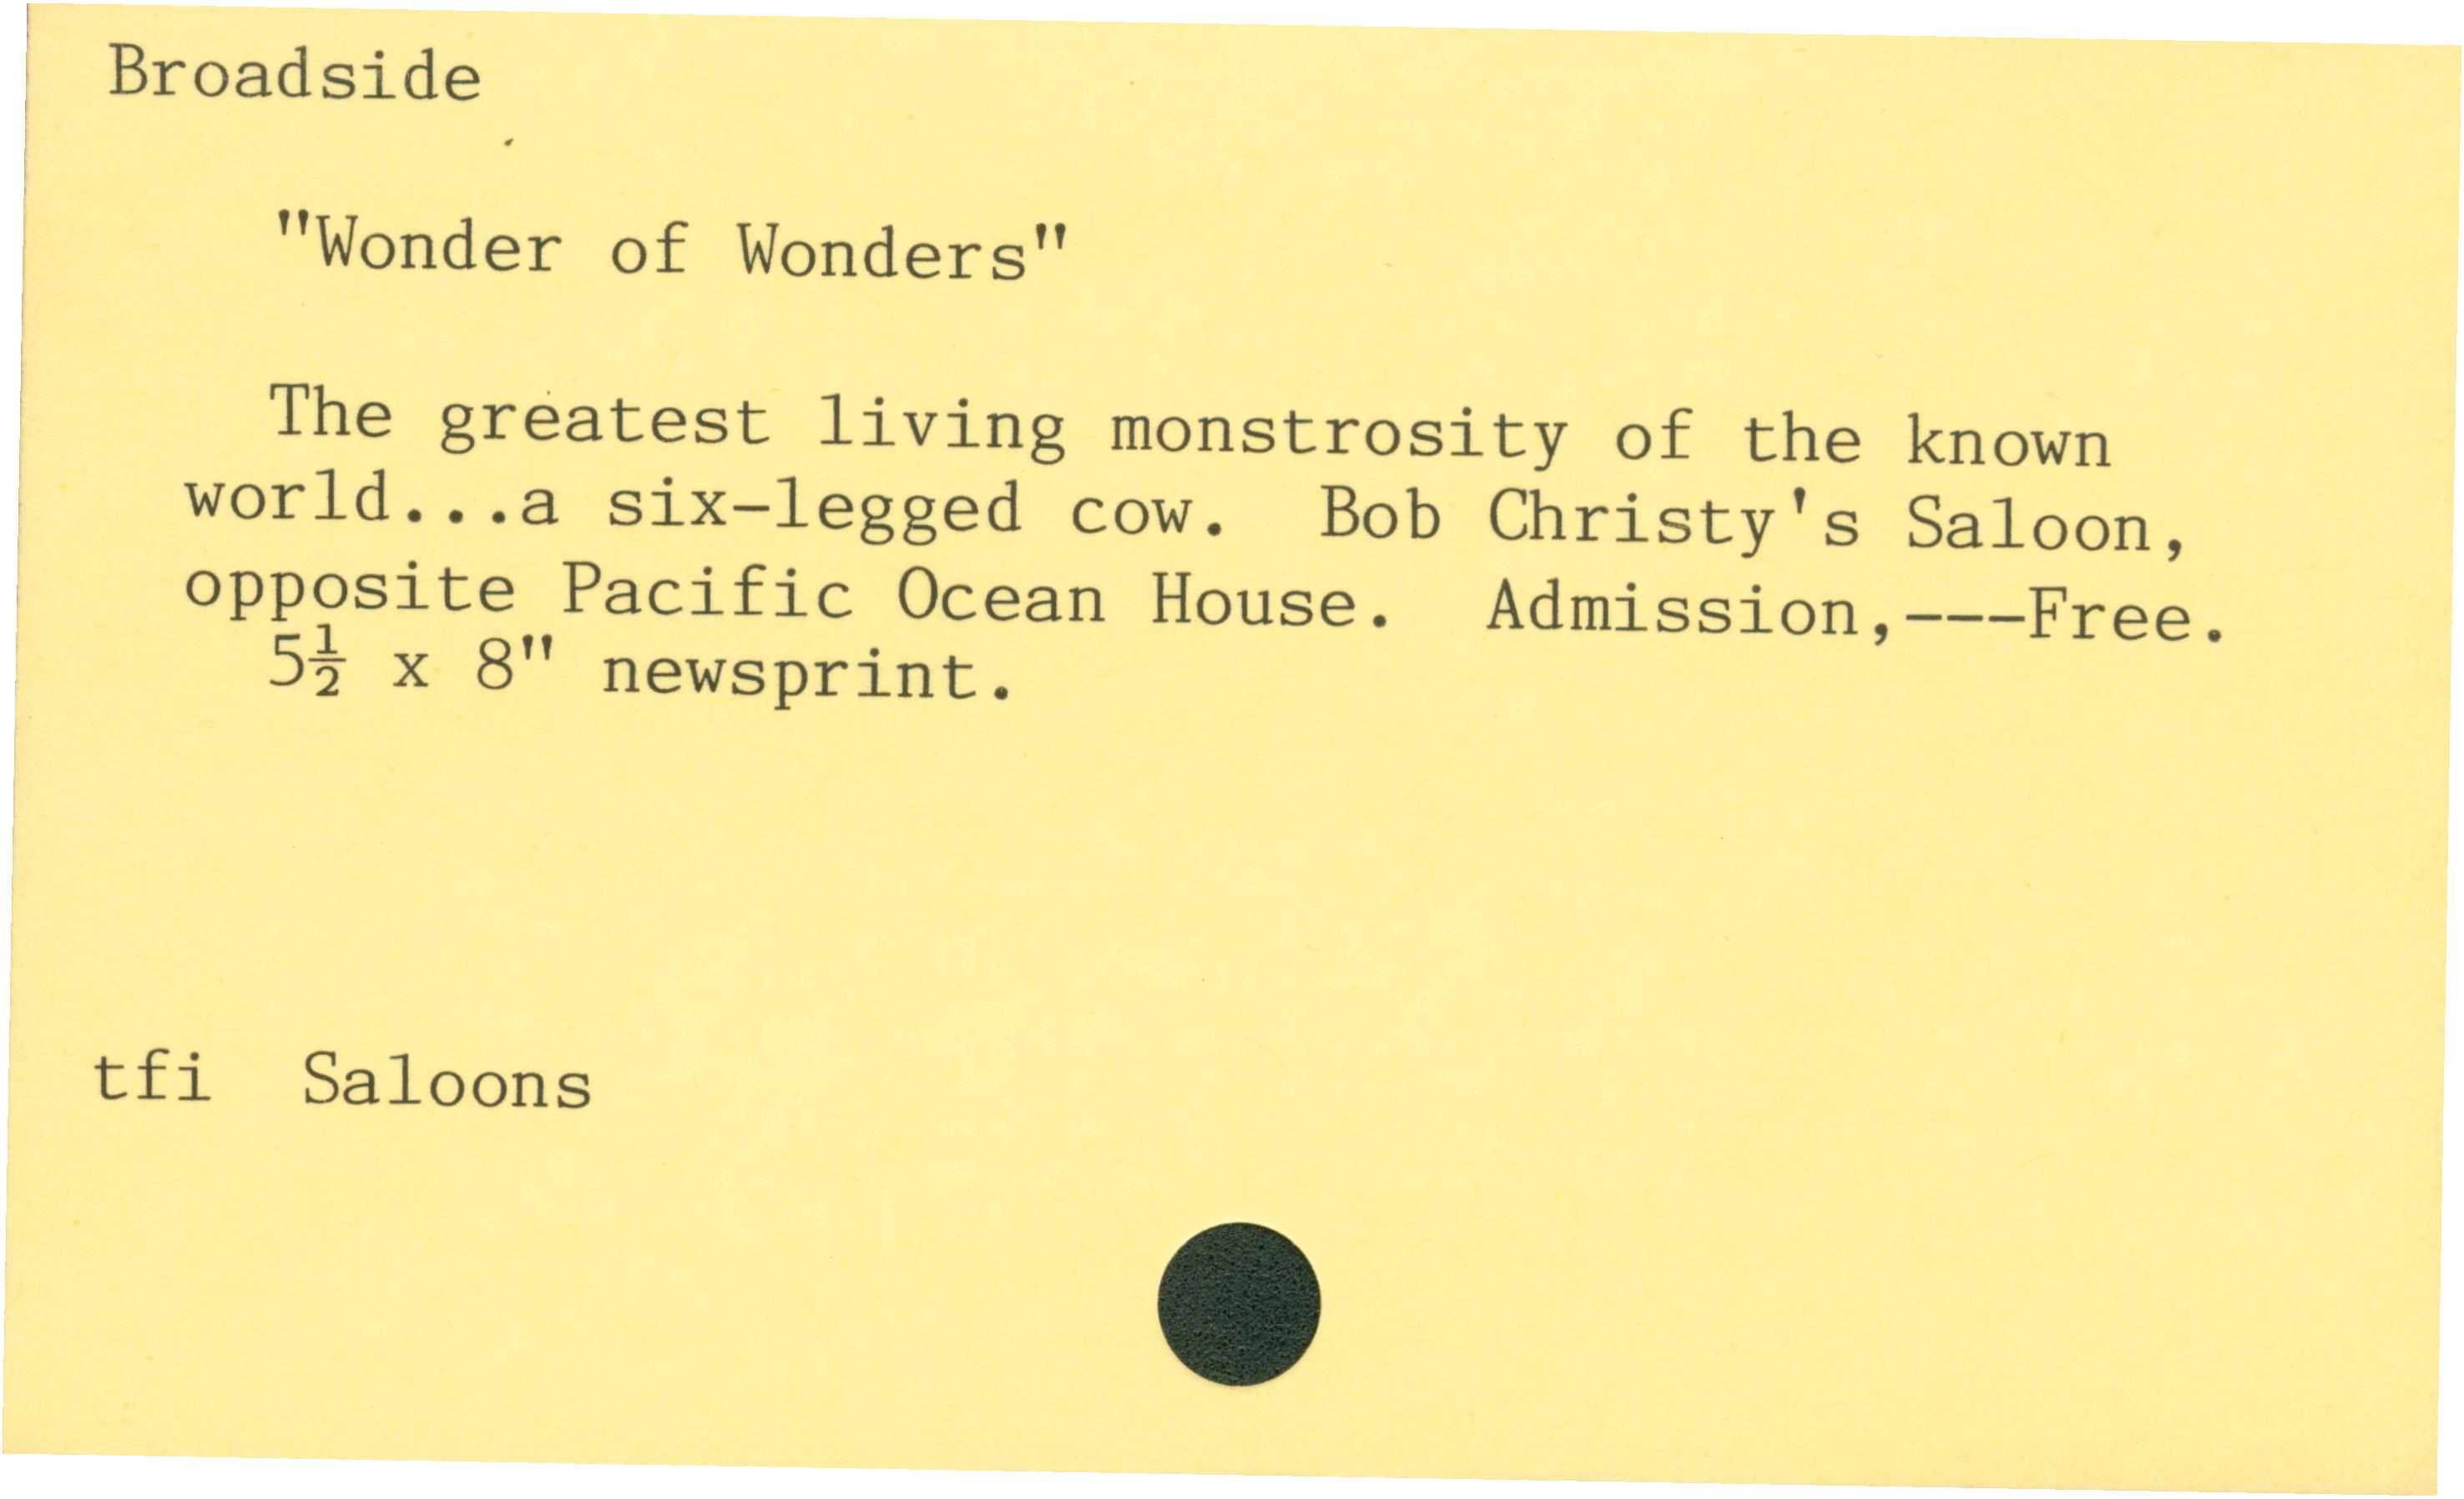 Broadside'Wonder of Wonders'The greatest living monstrosity of the known world…a six-legged cow. Bob Christy's Saloon, opposite Pacific Ocean House. Admission, -- -Free.5 1/2 x 8 in. newsprinttfi saloons